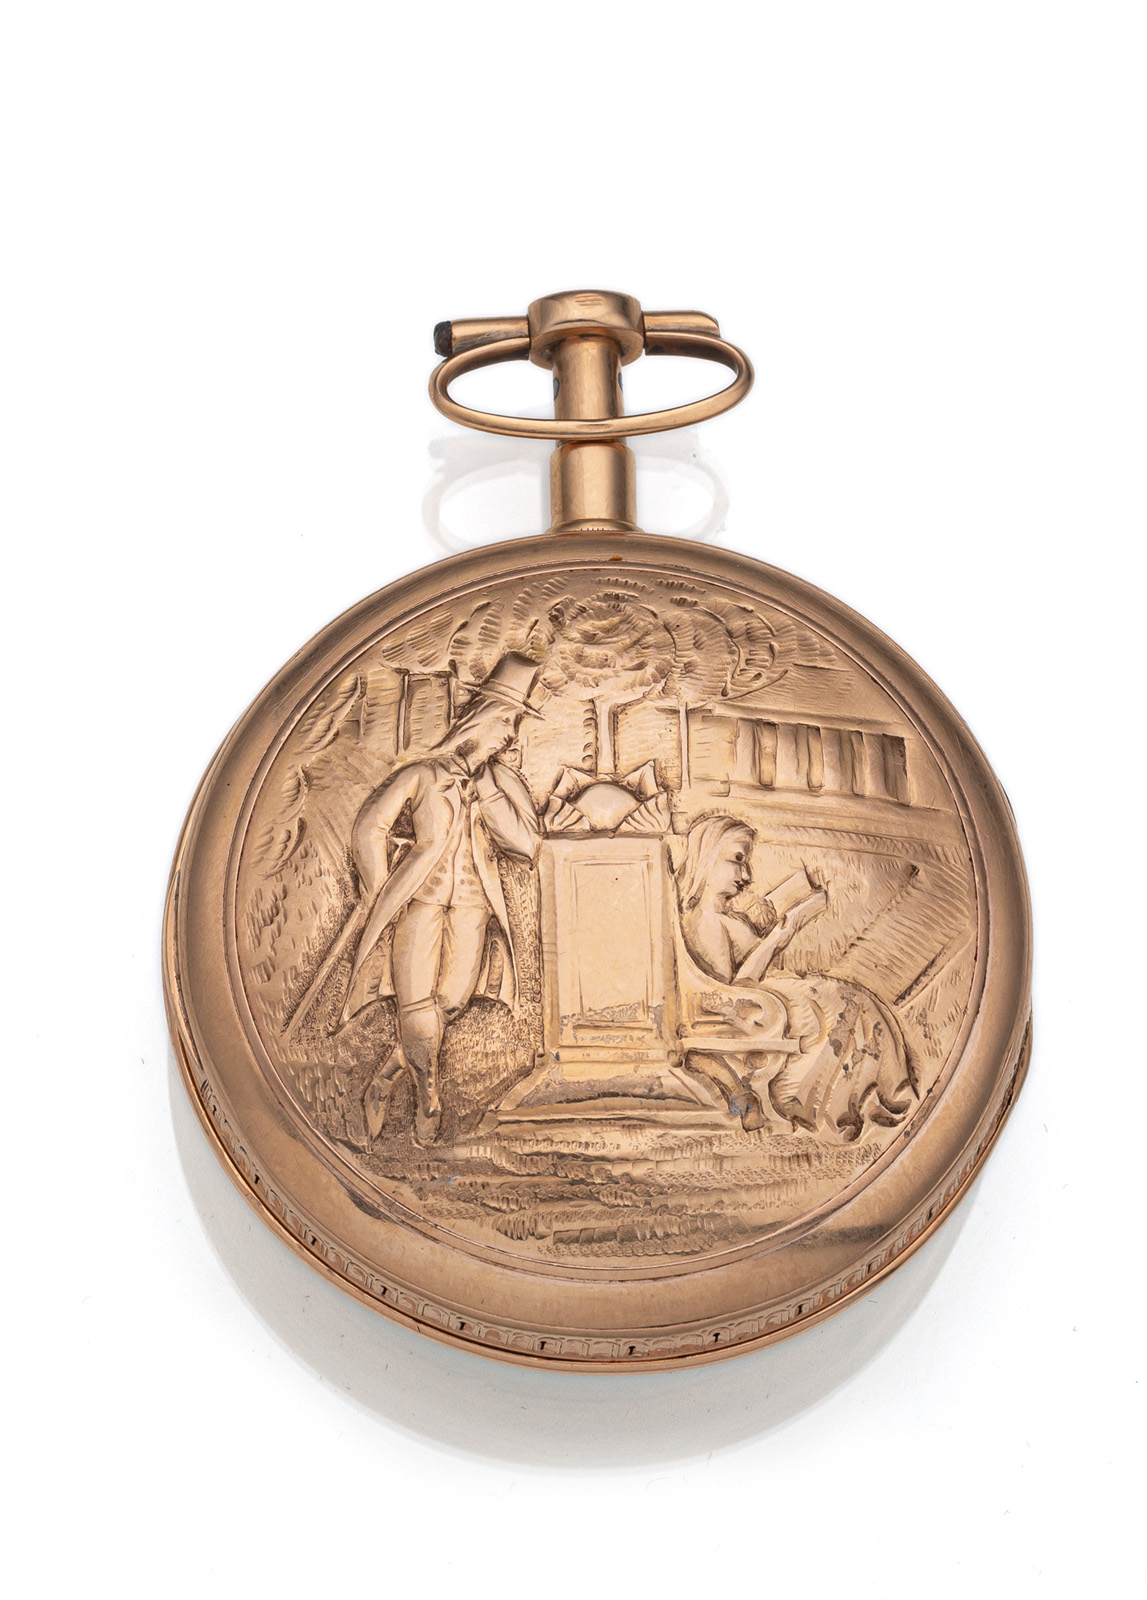 A GOLD POCKET WATCH WITH QUARTER REPETITION - Image 4 of 4